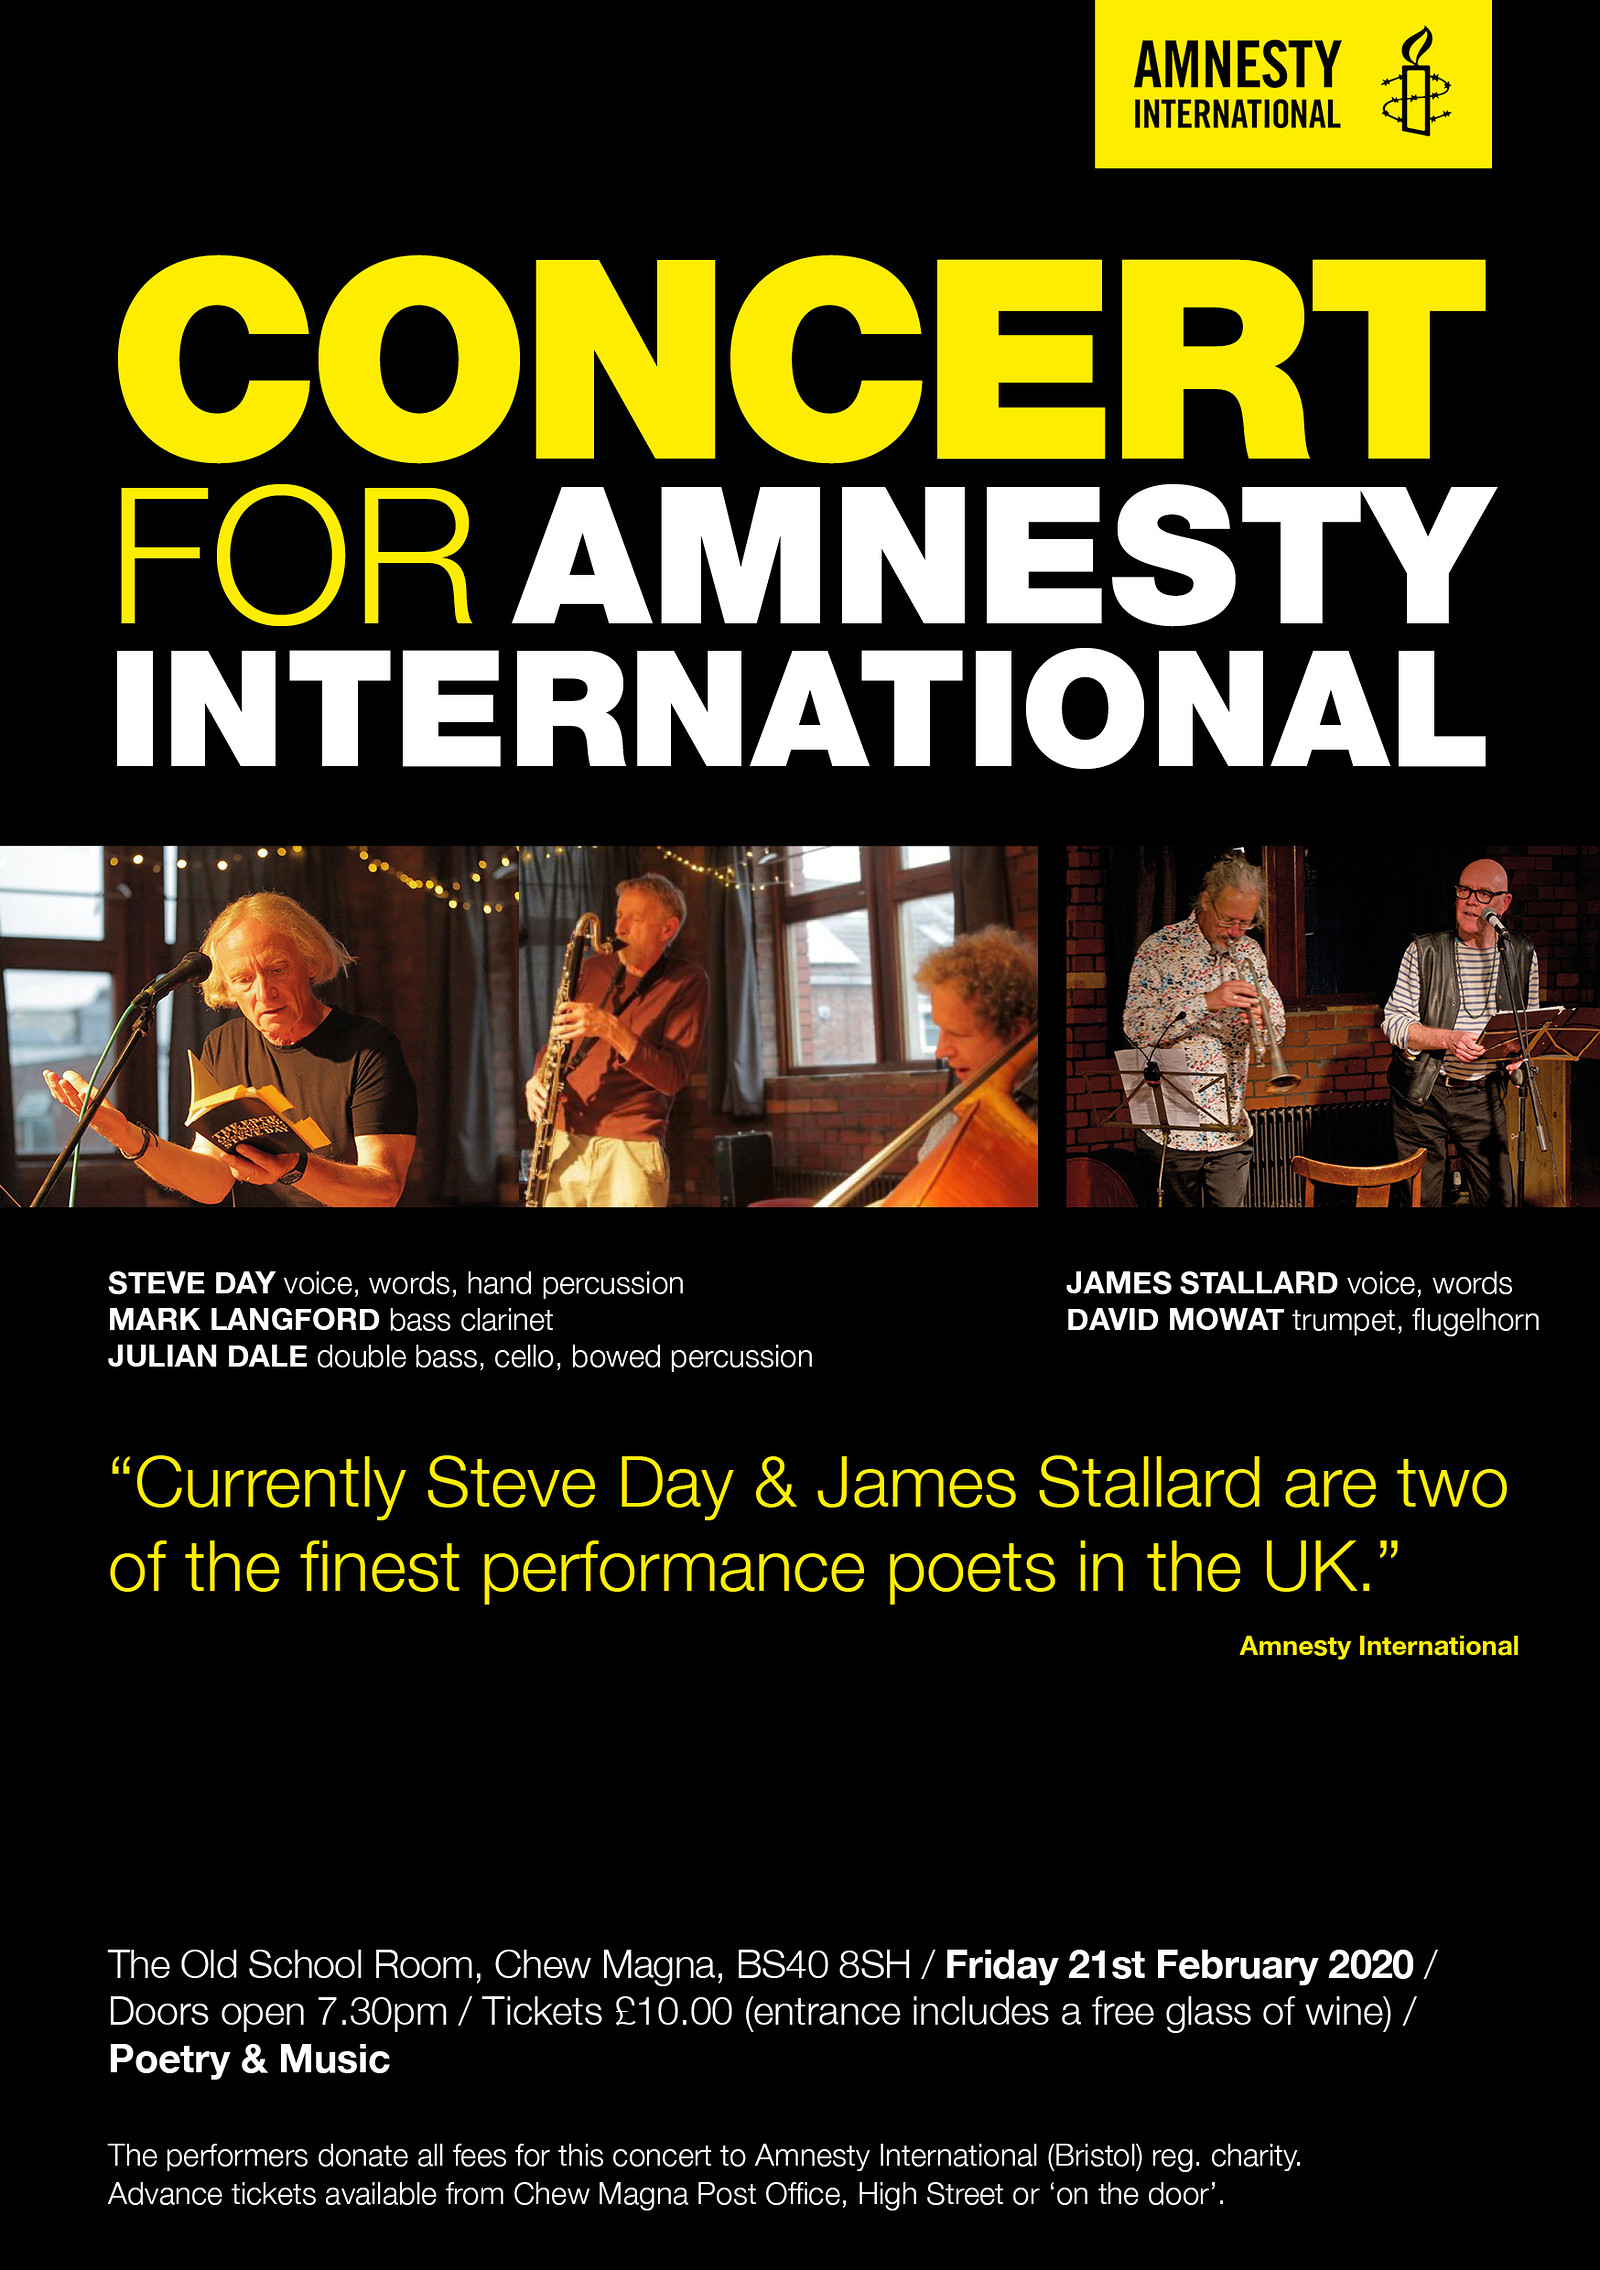 Amnesty Benefit Poetry and Music at The Old School House Chew Magna